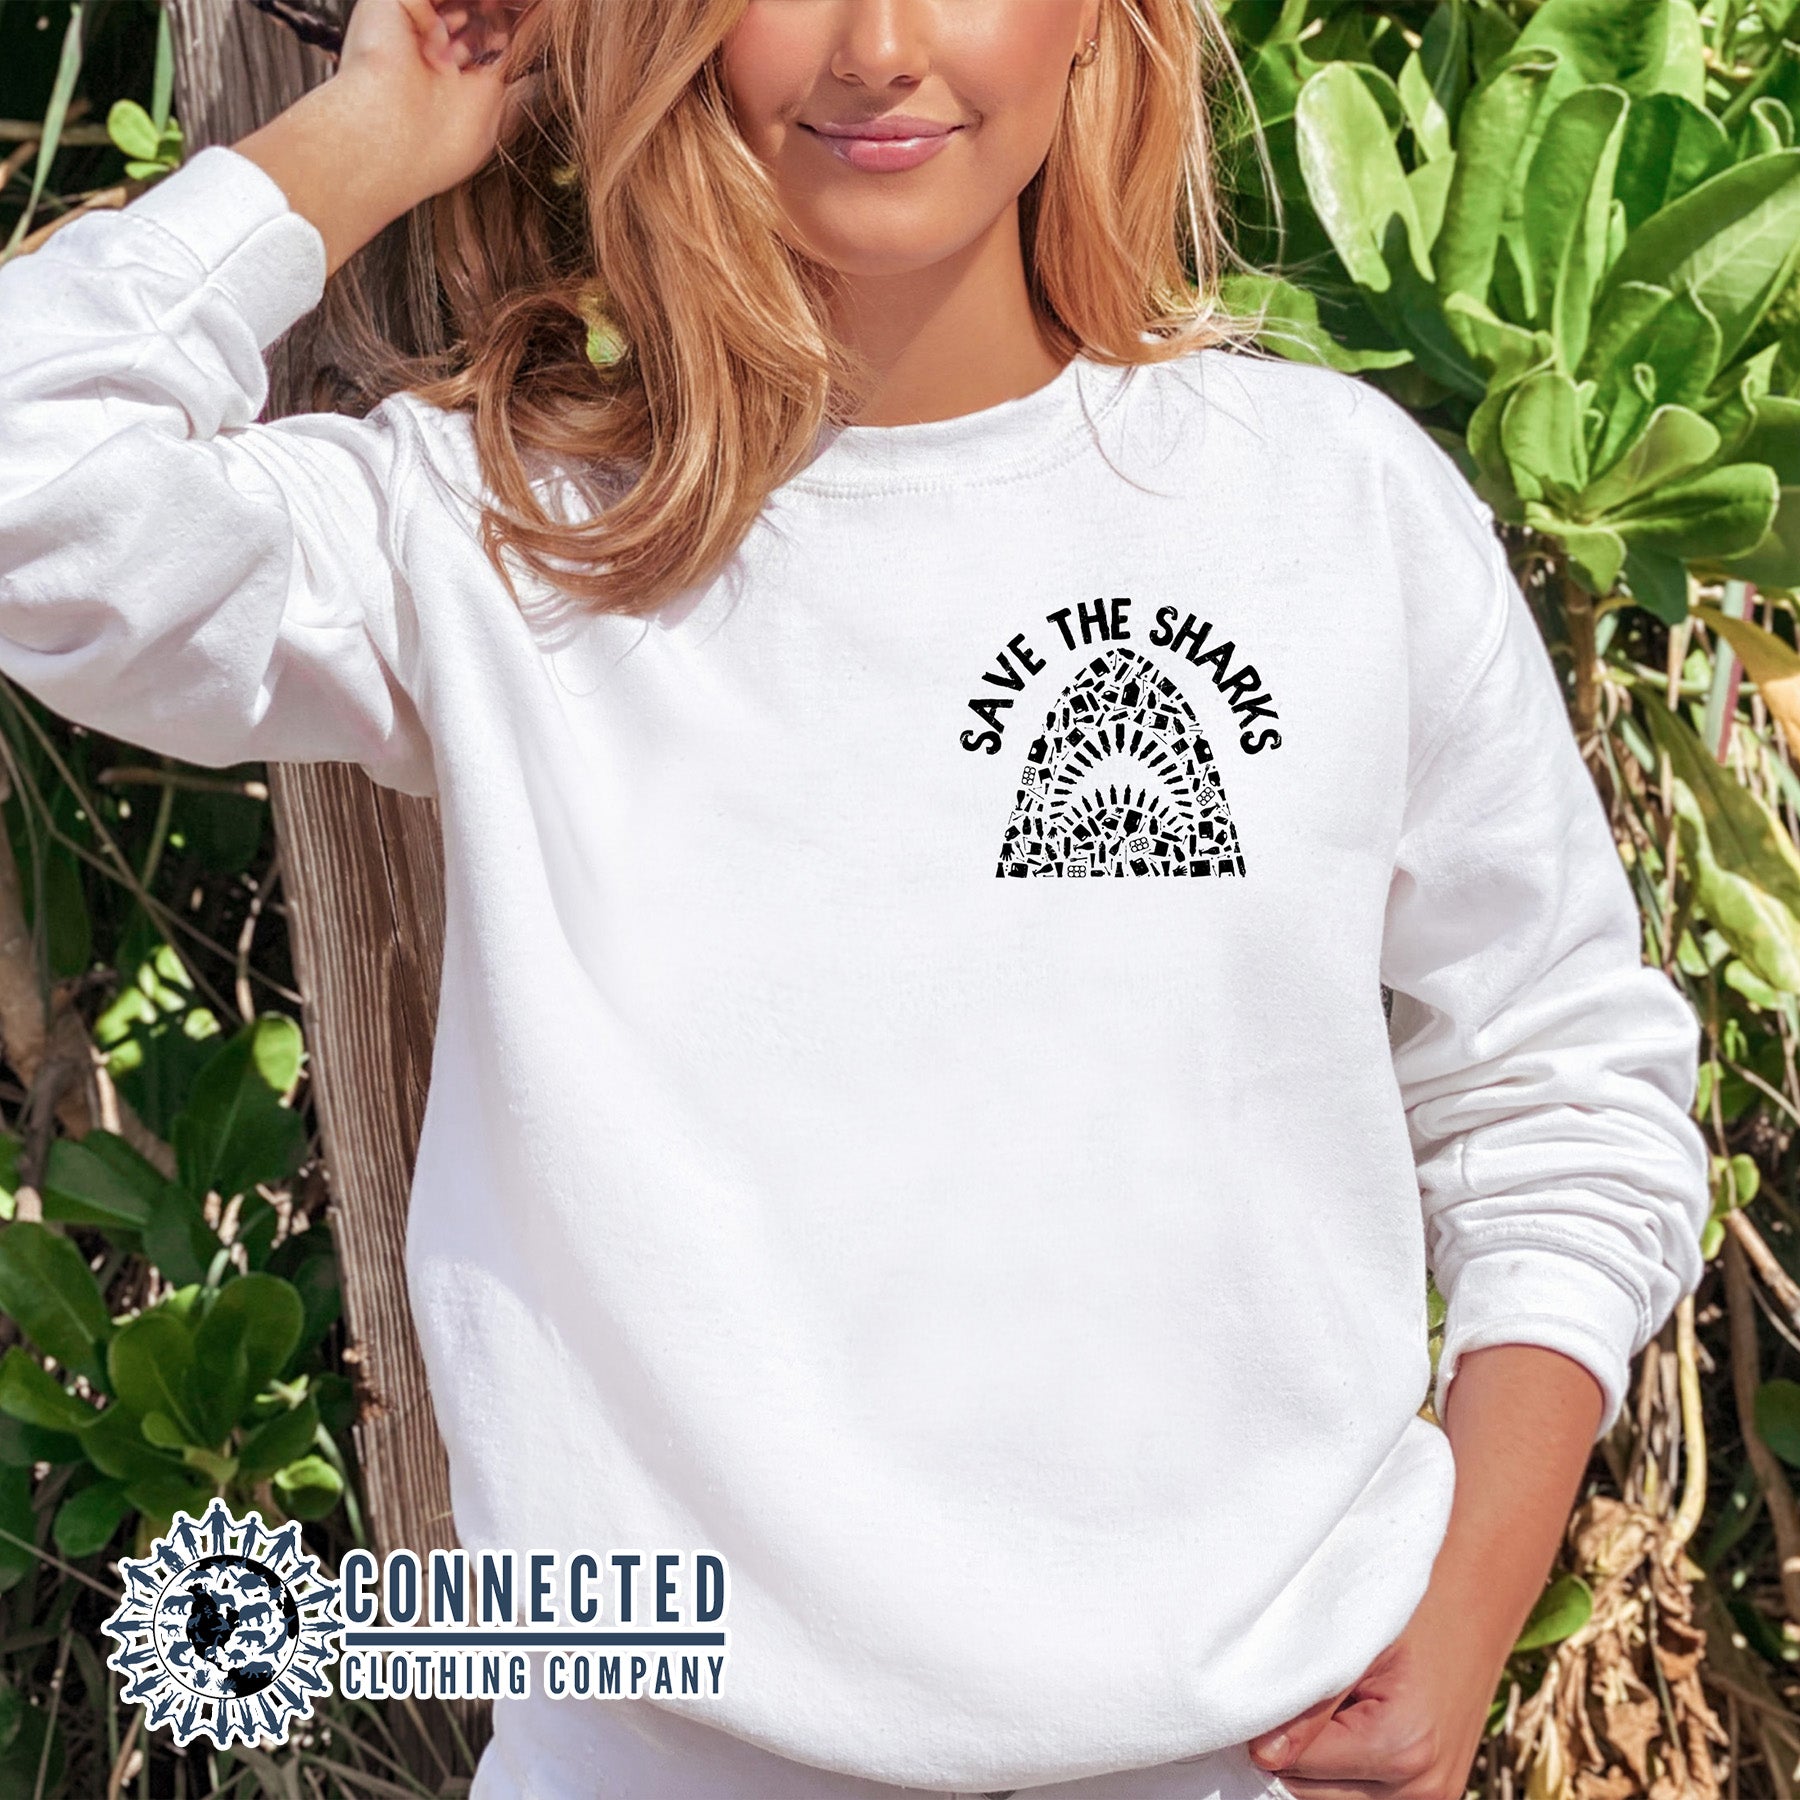 Save The Sharls Crewneck Sweatshirt - architectconstructor - 10% of the proceeds are donated to shark conservation